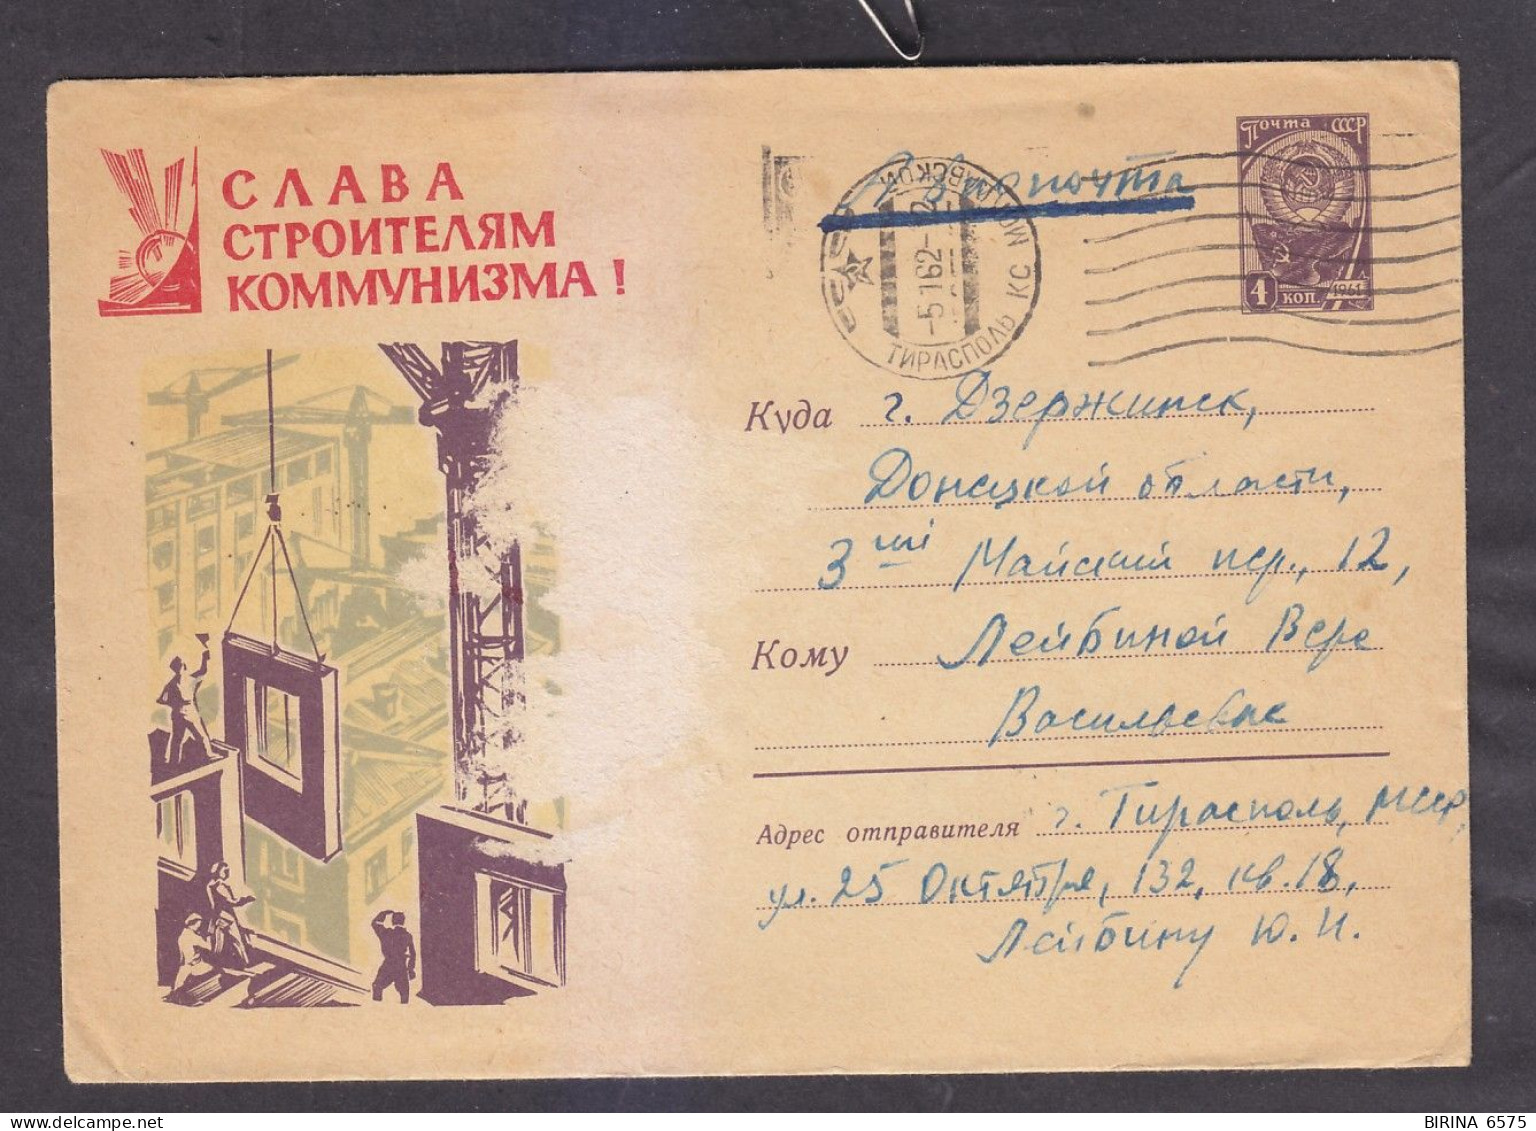 Envelope. The USSR. GLORY TO THE BUILDERS OF COMMUNISM!. Mail. 1962. - 8-44 - Briefe U. Dokumente